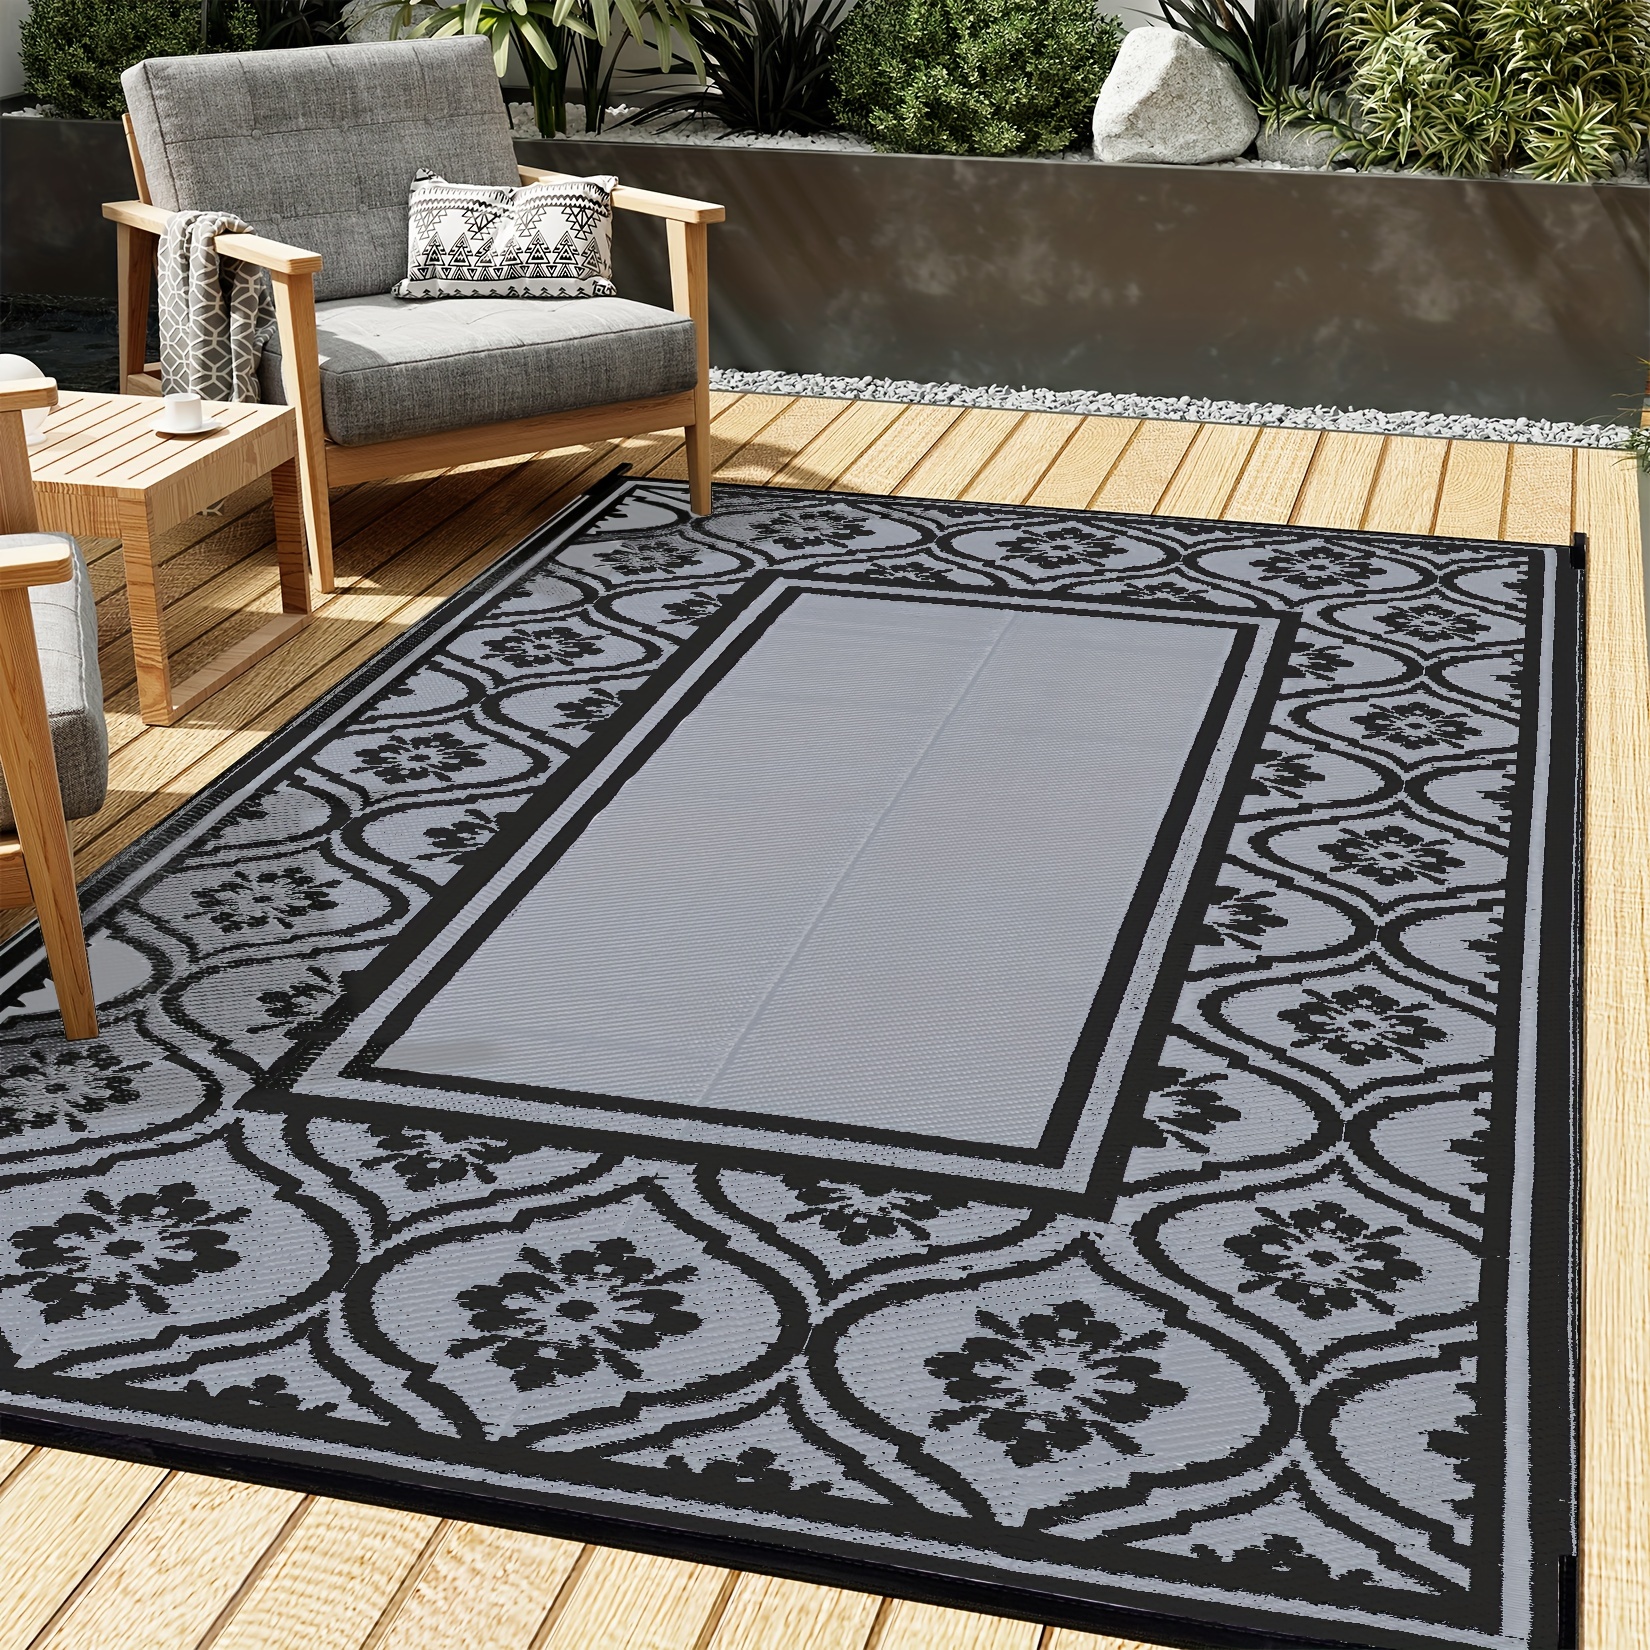 Findosom 9'x12' Reversible Outdoor Mats, Patio Outdoor Rugs, Plastic Straw  Rug, RV Outdoor Mats, Camping Rugs Waterproof Large Outdoor Area Rug for